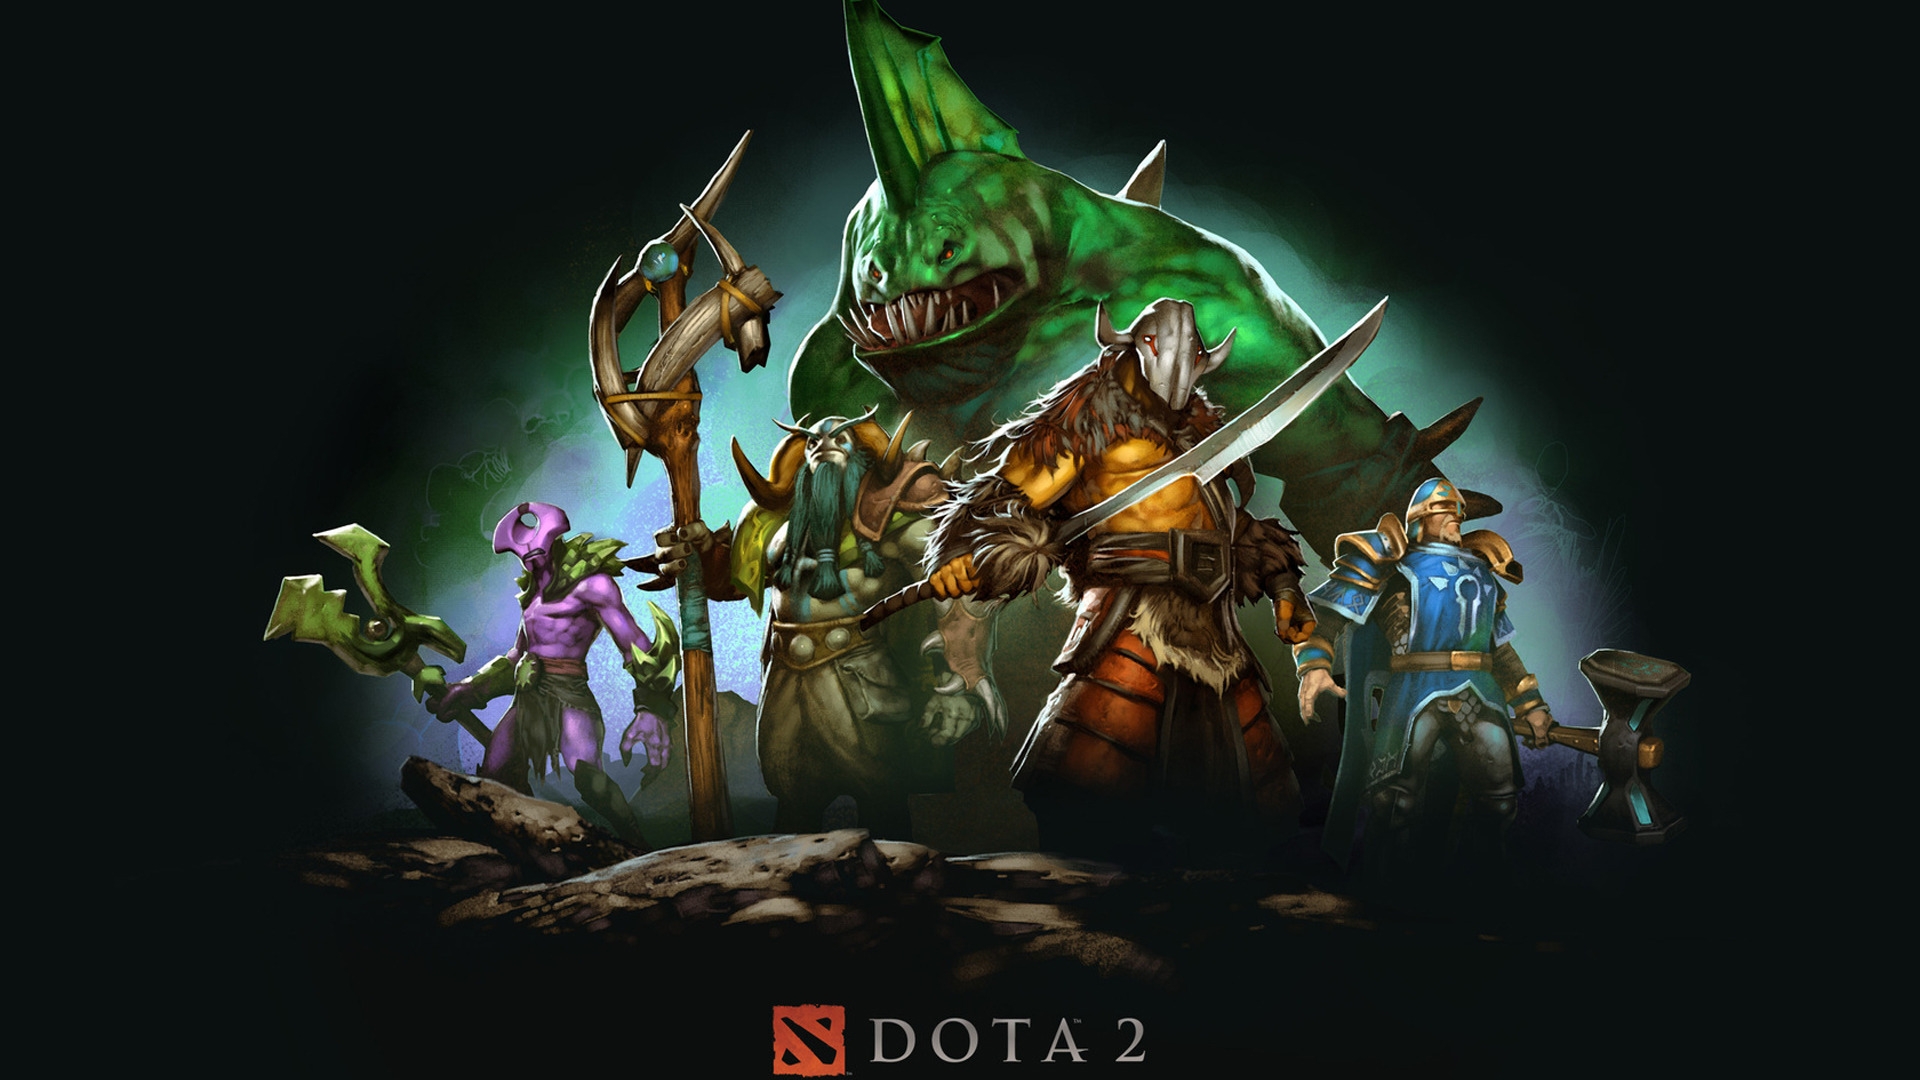 Dota 2 Characters for 1920 x 1080 HDTV 1080p resolution